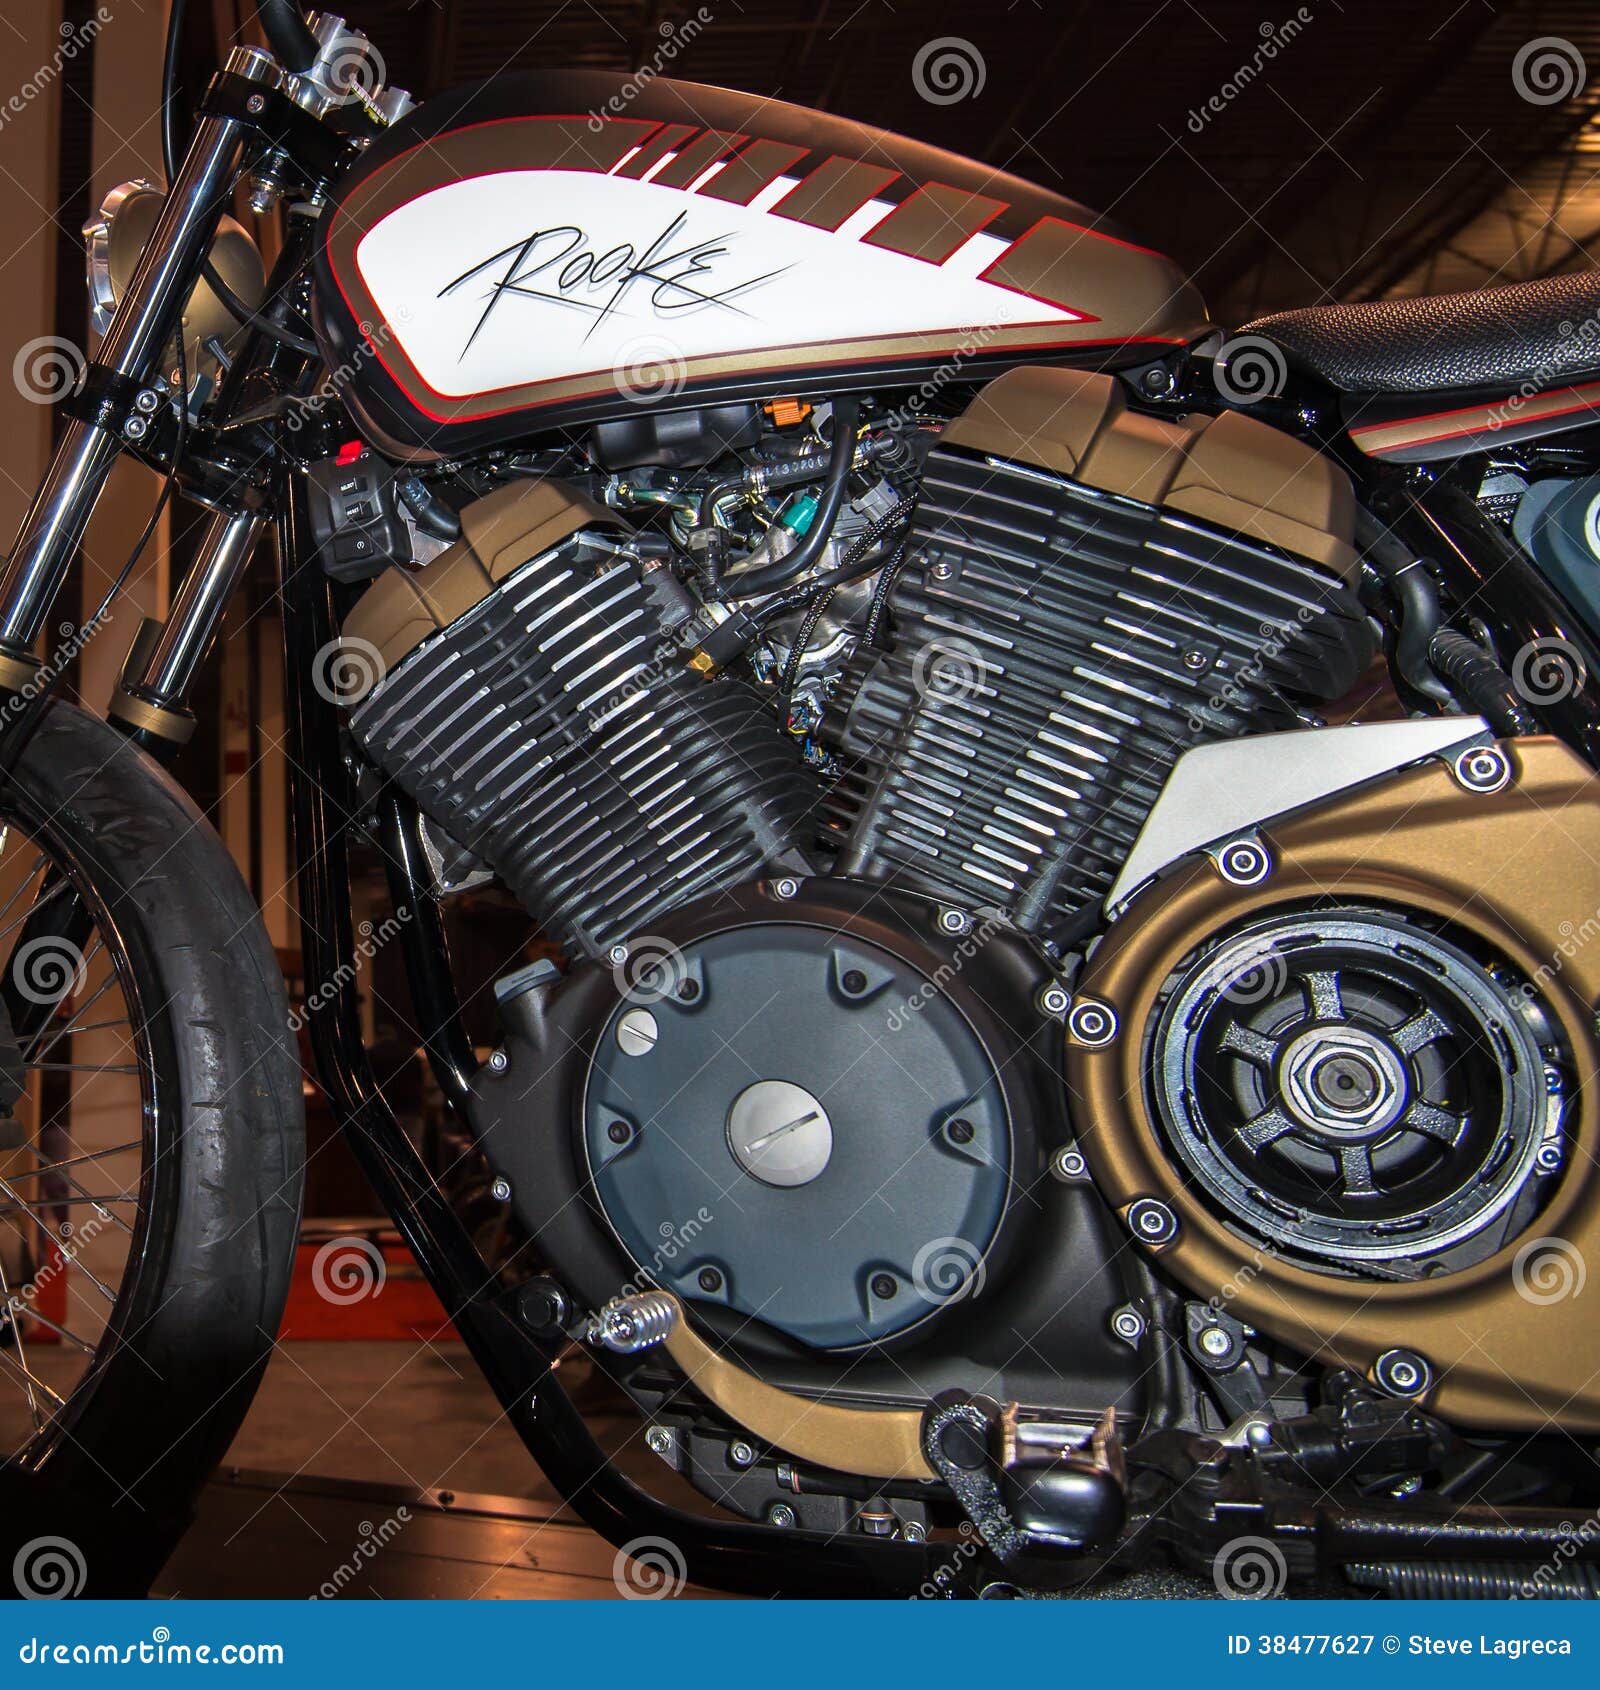 2014 Rooke Engine, Michigan Motorcycle Show Editorial Photography ...